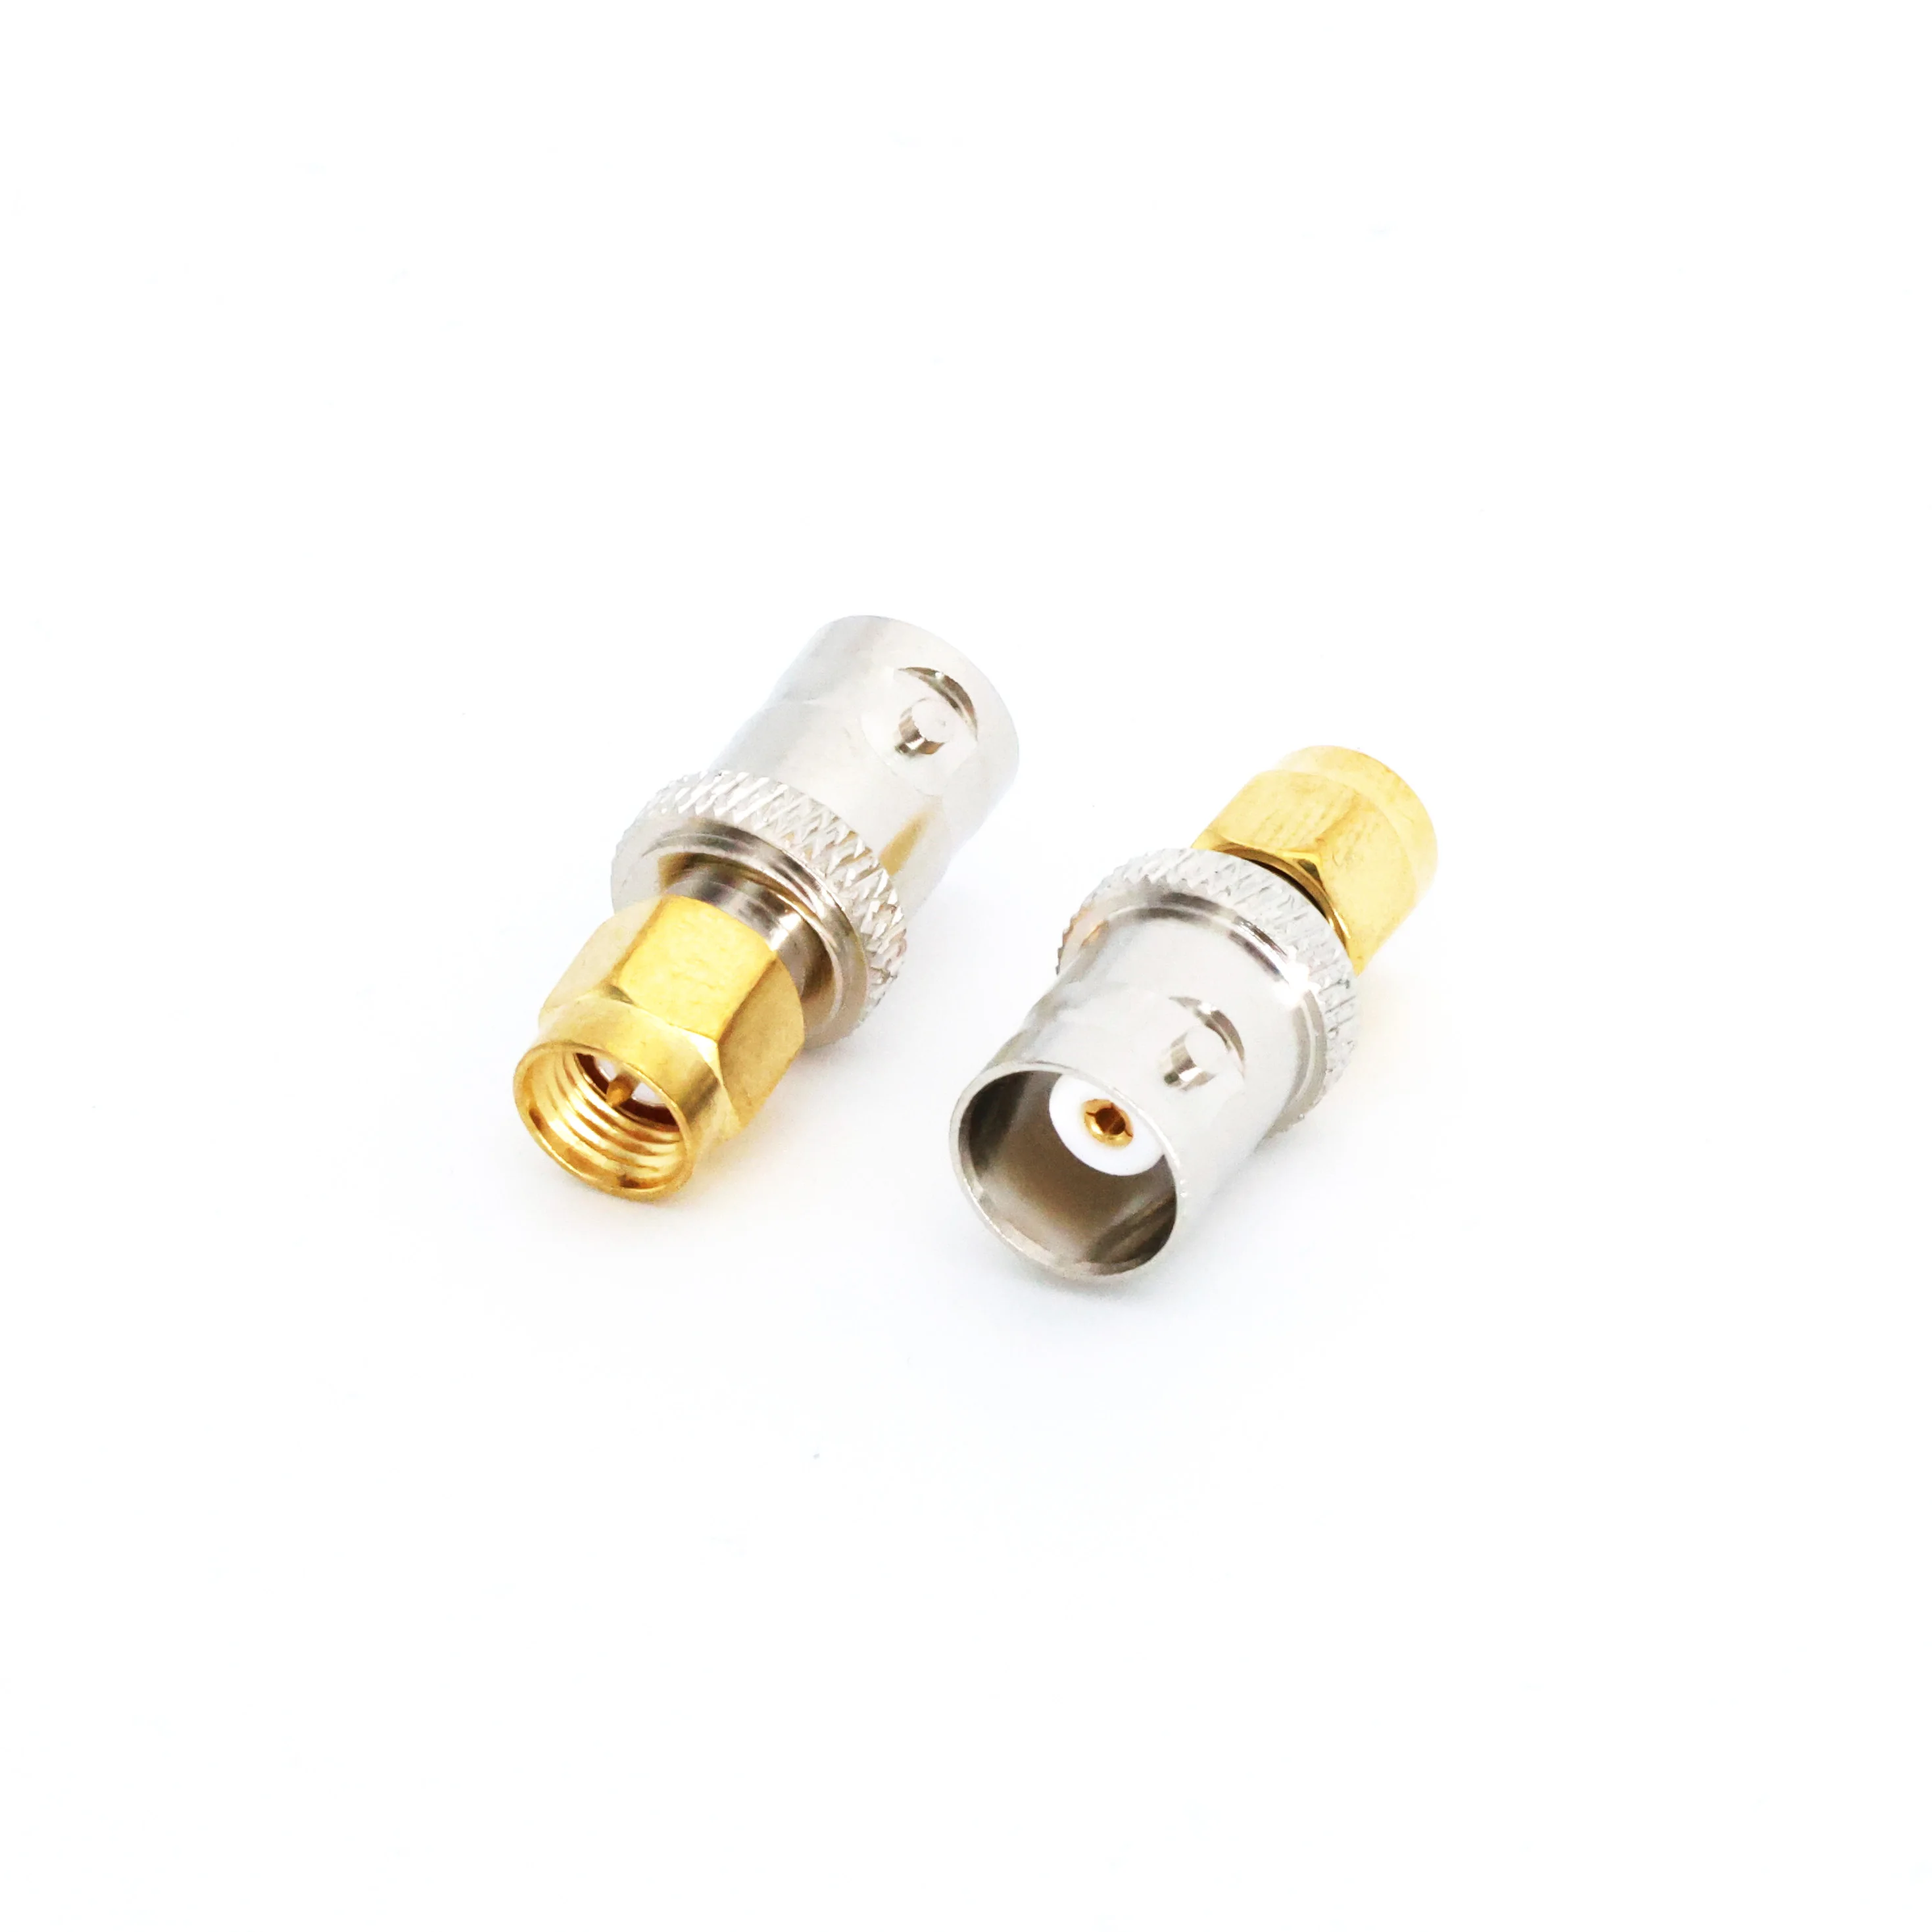 2pcs Coaxial connector SMA to BNC SMA (inner screw inner needle) to BNC female SMA-J/BNC-K adapter 2pcs f type coupler adapter connector female f f jack rg6 coax coaxial cable used in video sma rf coax connector plug